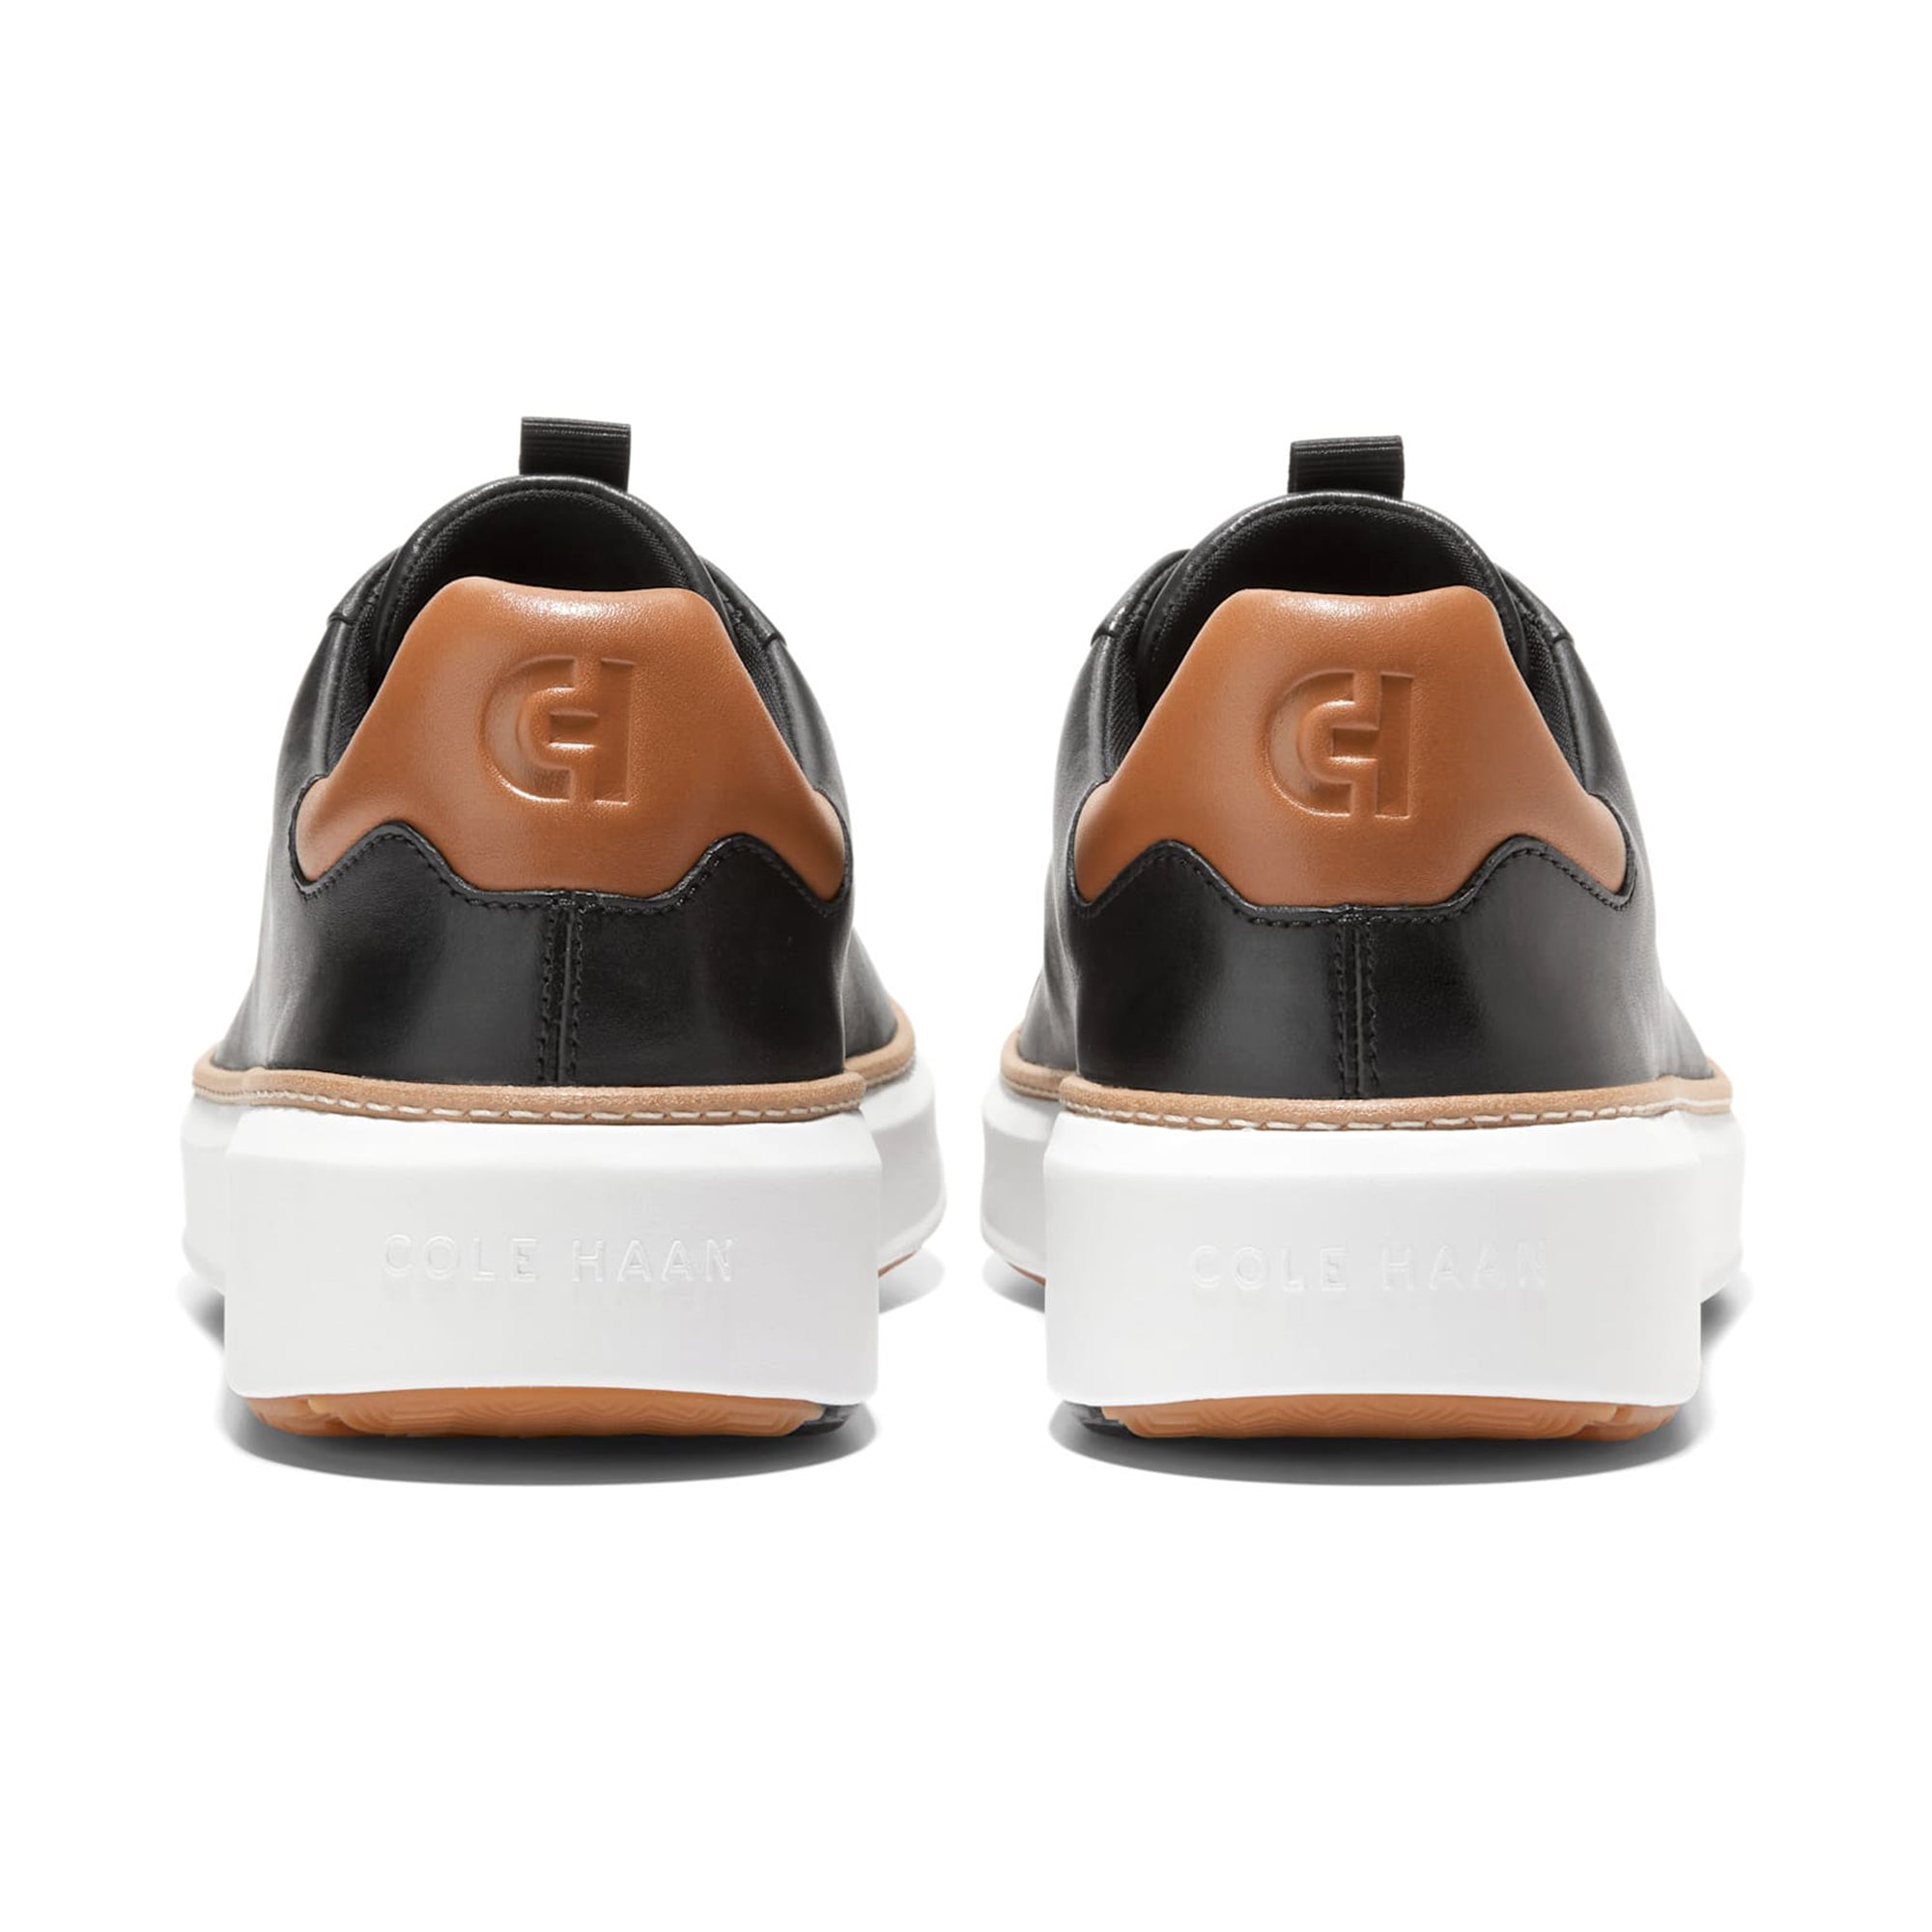 cole-haan-grandpro-topspin-golf-shoes-c38504-black-pecan-optic-white